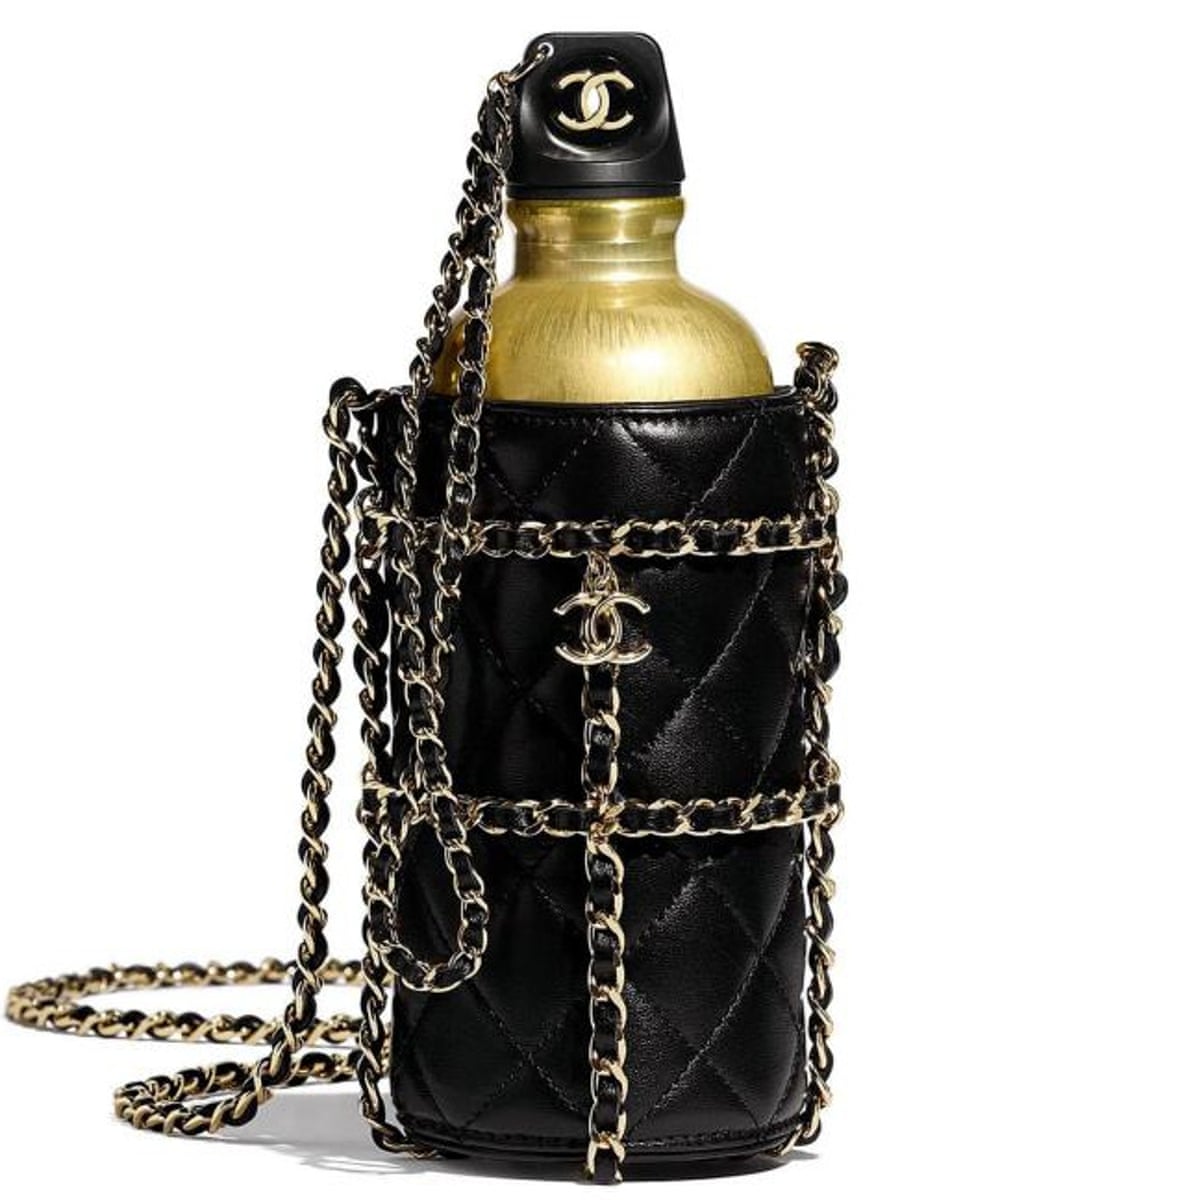 Eau so expensive! Chanel's £4,410 water bottle | Chanel | The Guardian